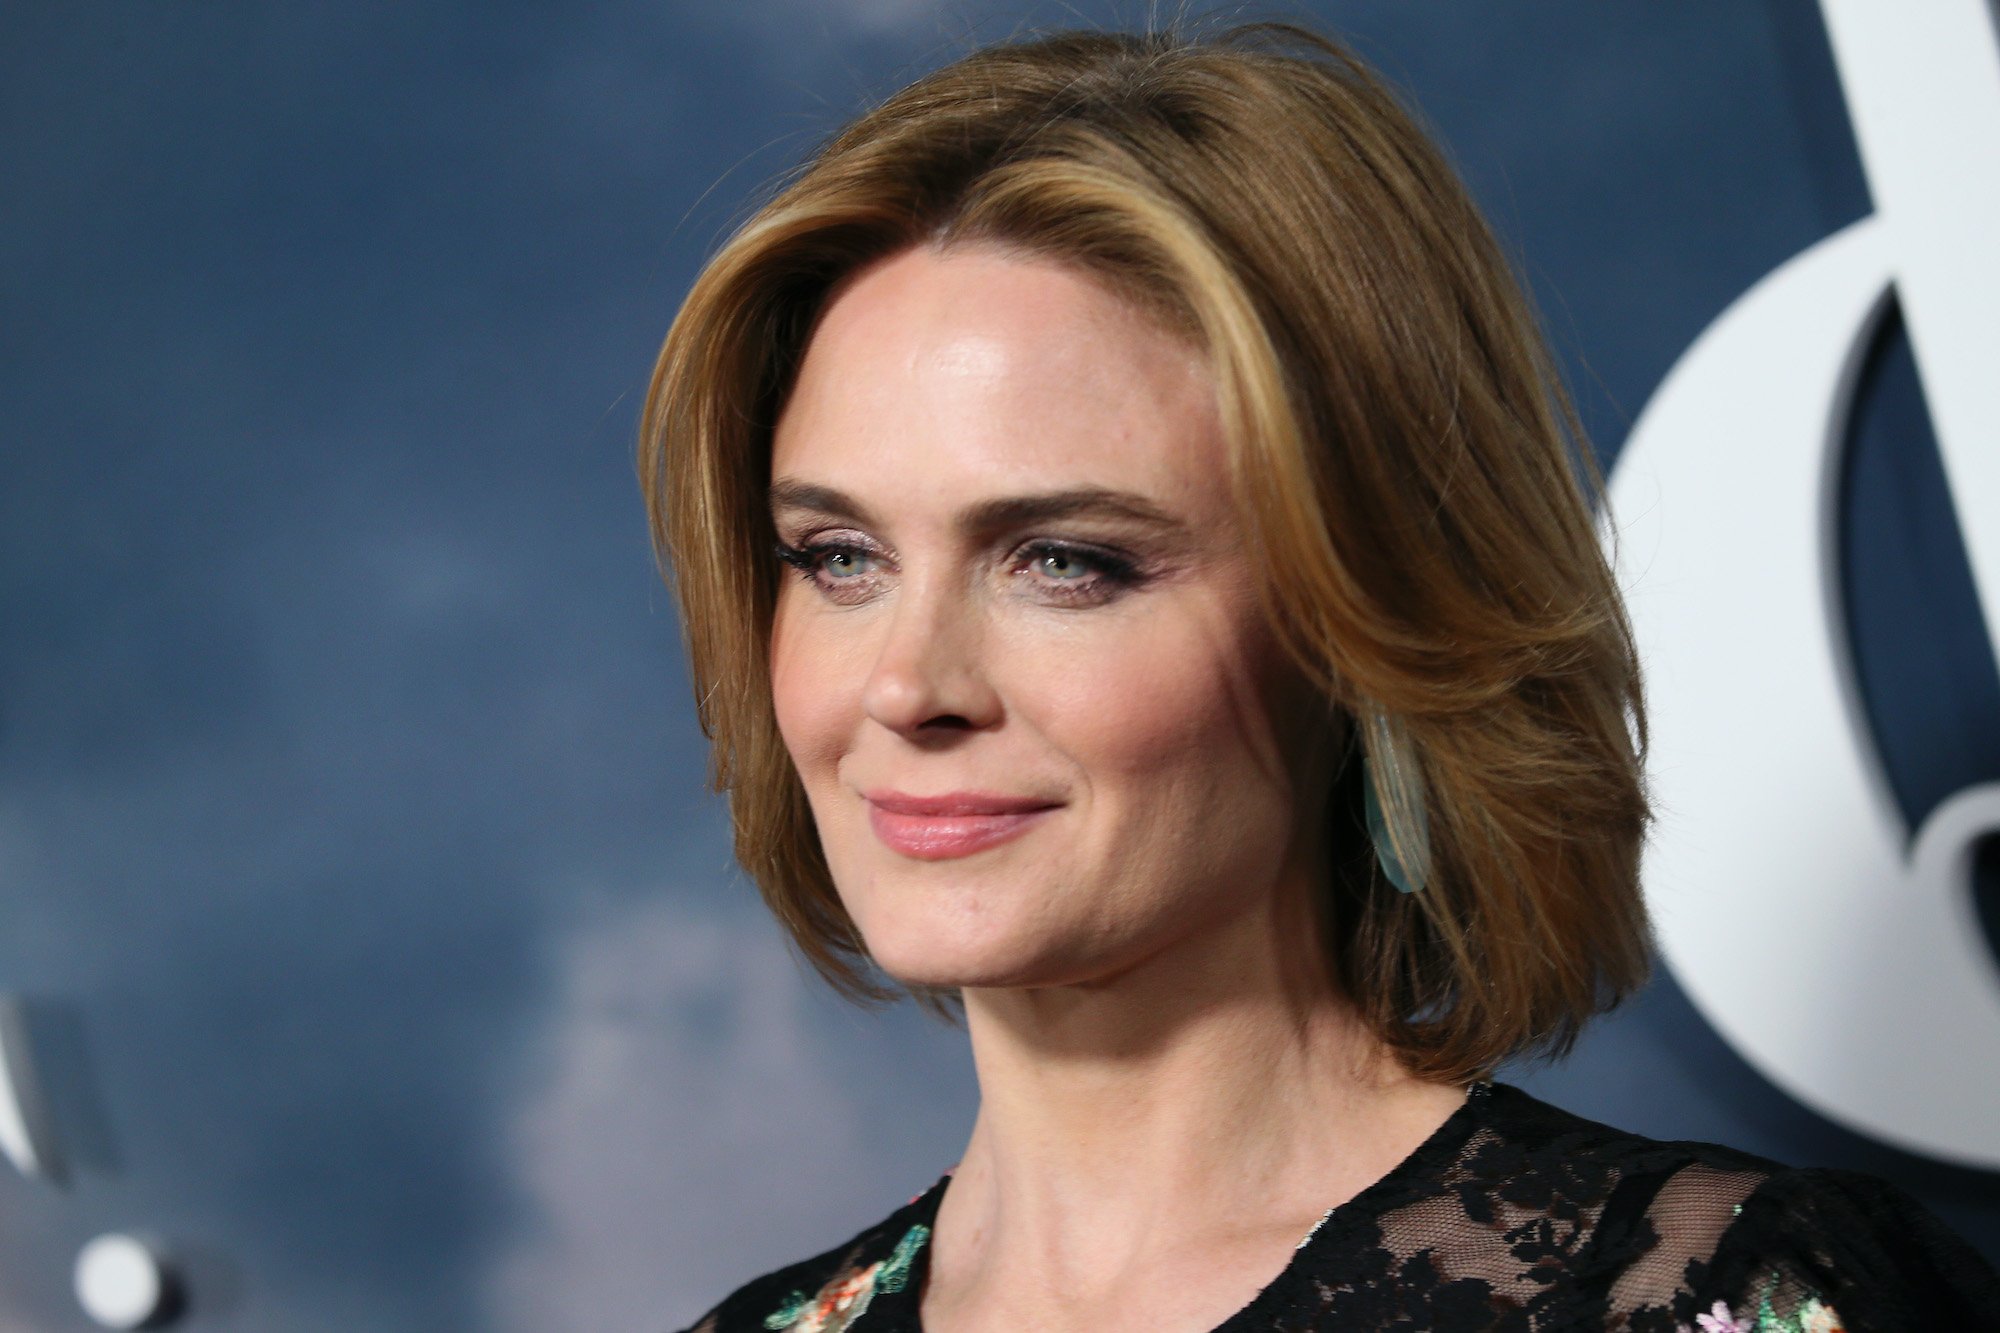 Bones': Why Emily Deschanel's Pregnancy While Filming Was So ...